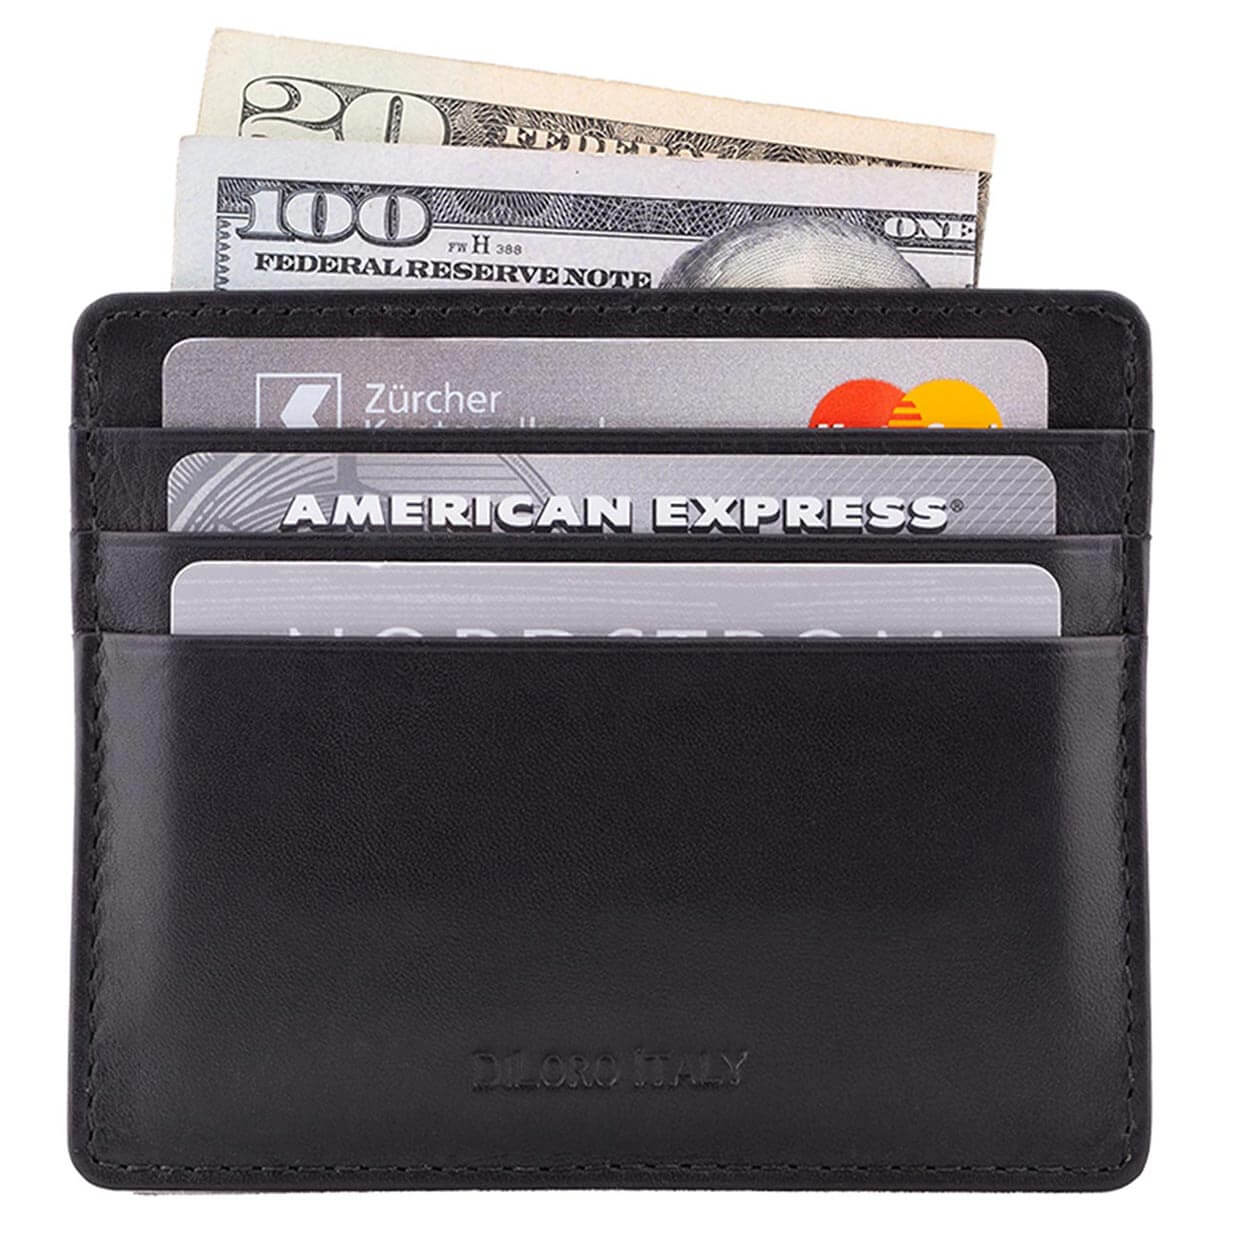  DAILYCARRYCO. Ultra Thin Leather Wallet - Slim RFID